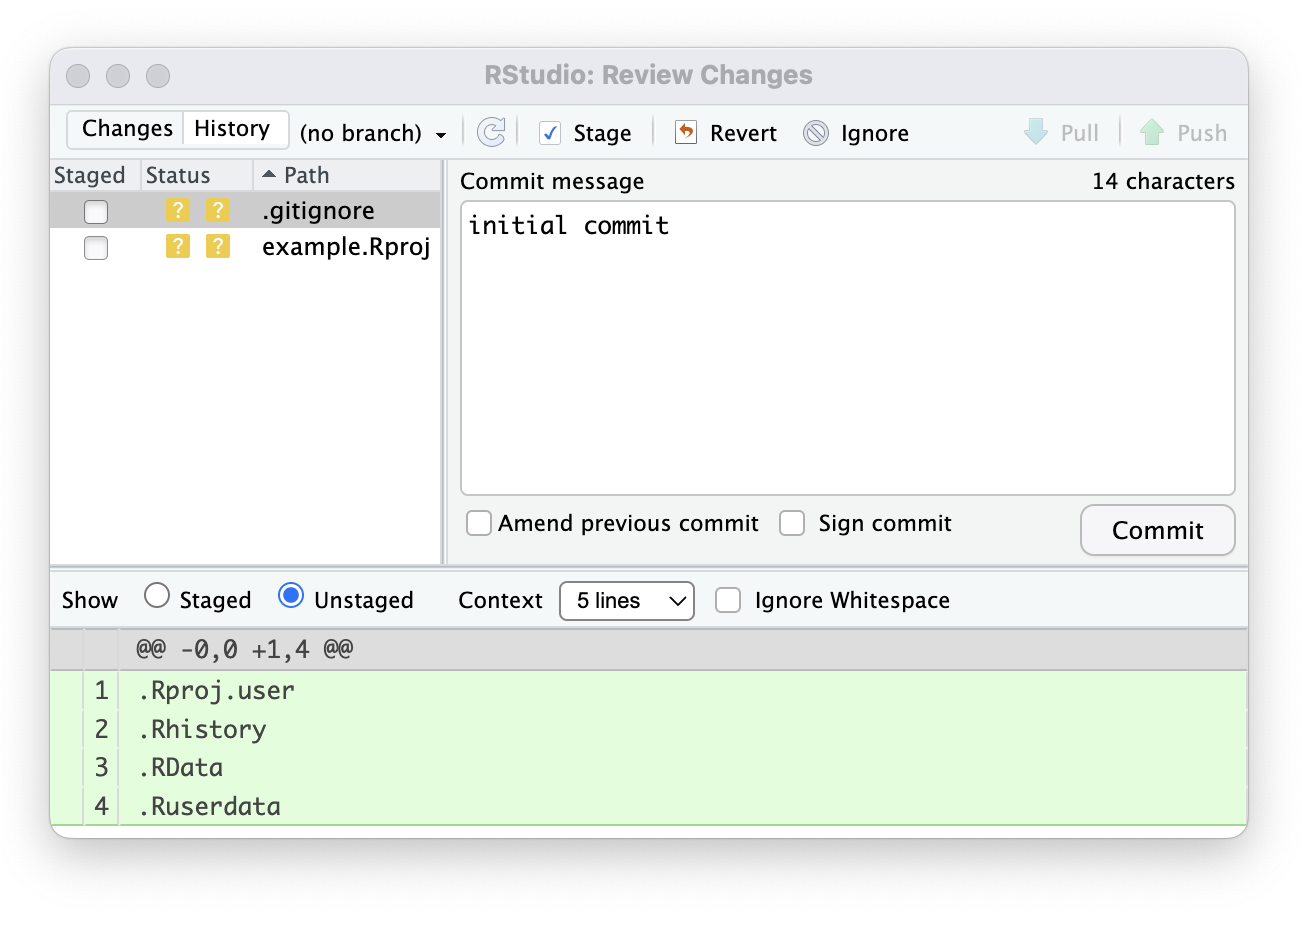 A screenshot of the Review Changes pop-up, indicating the files for staging and the ability to commit, push and pull changes.